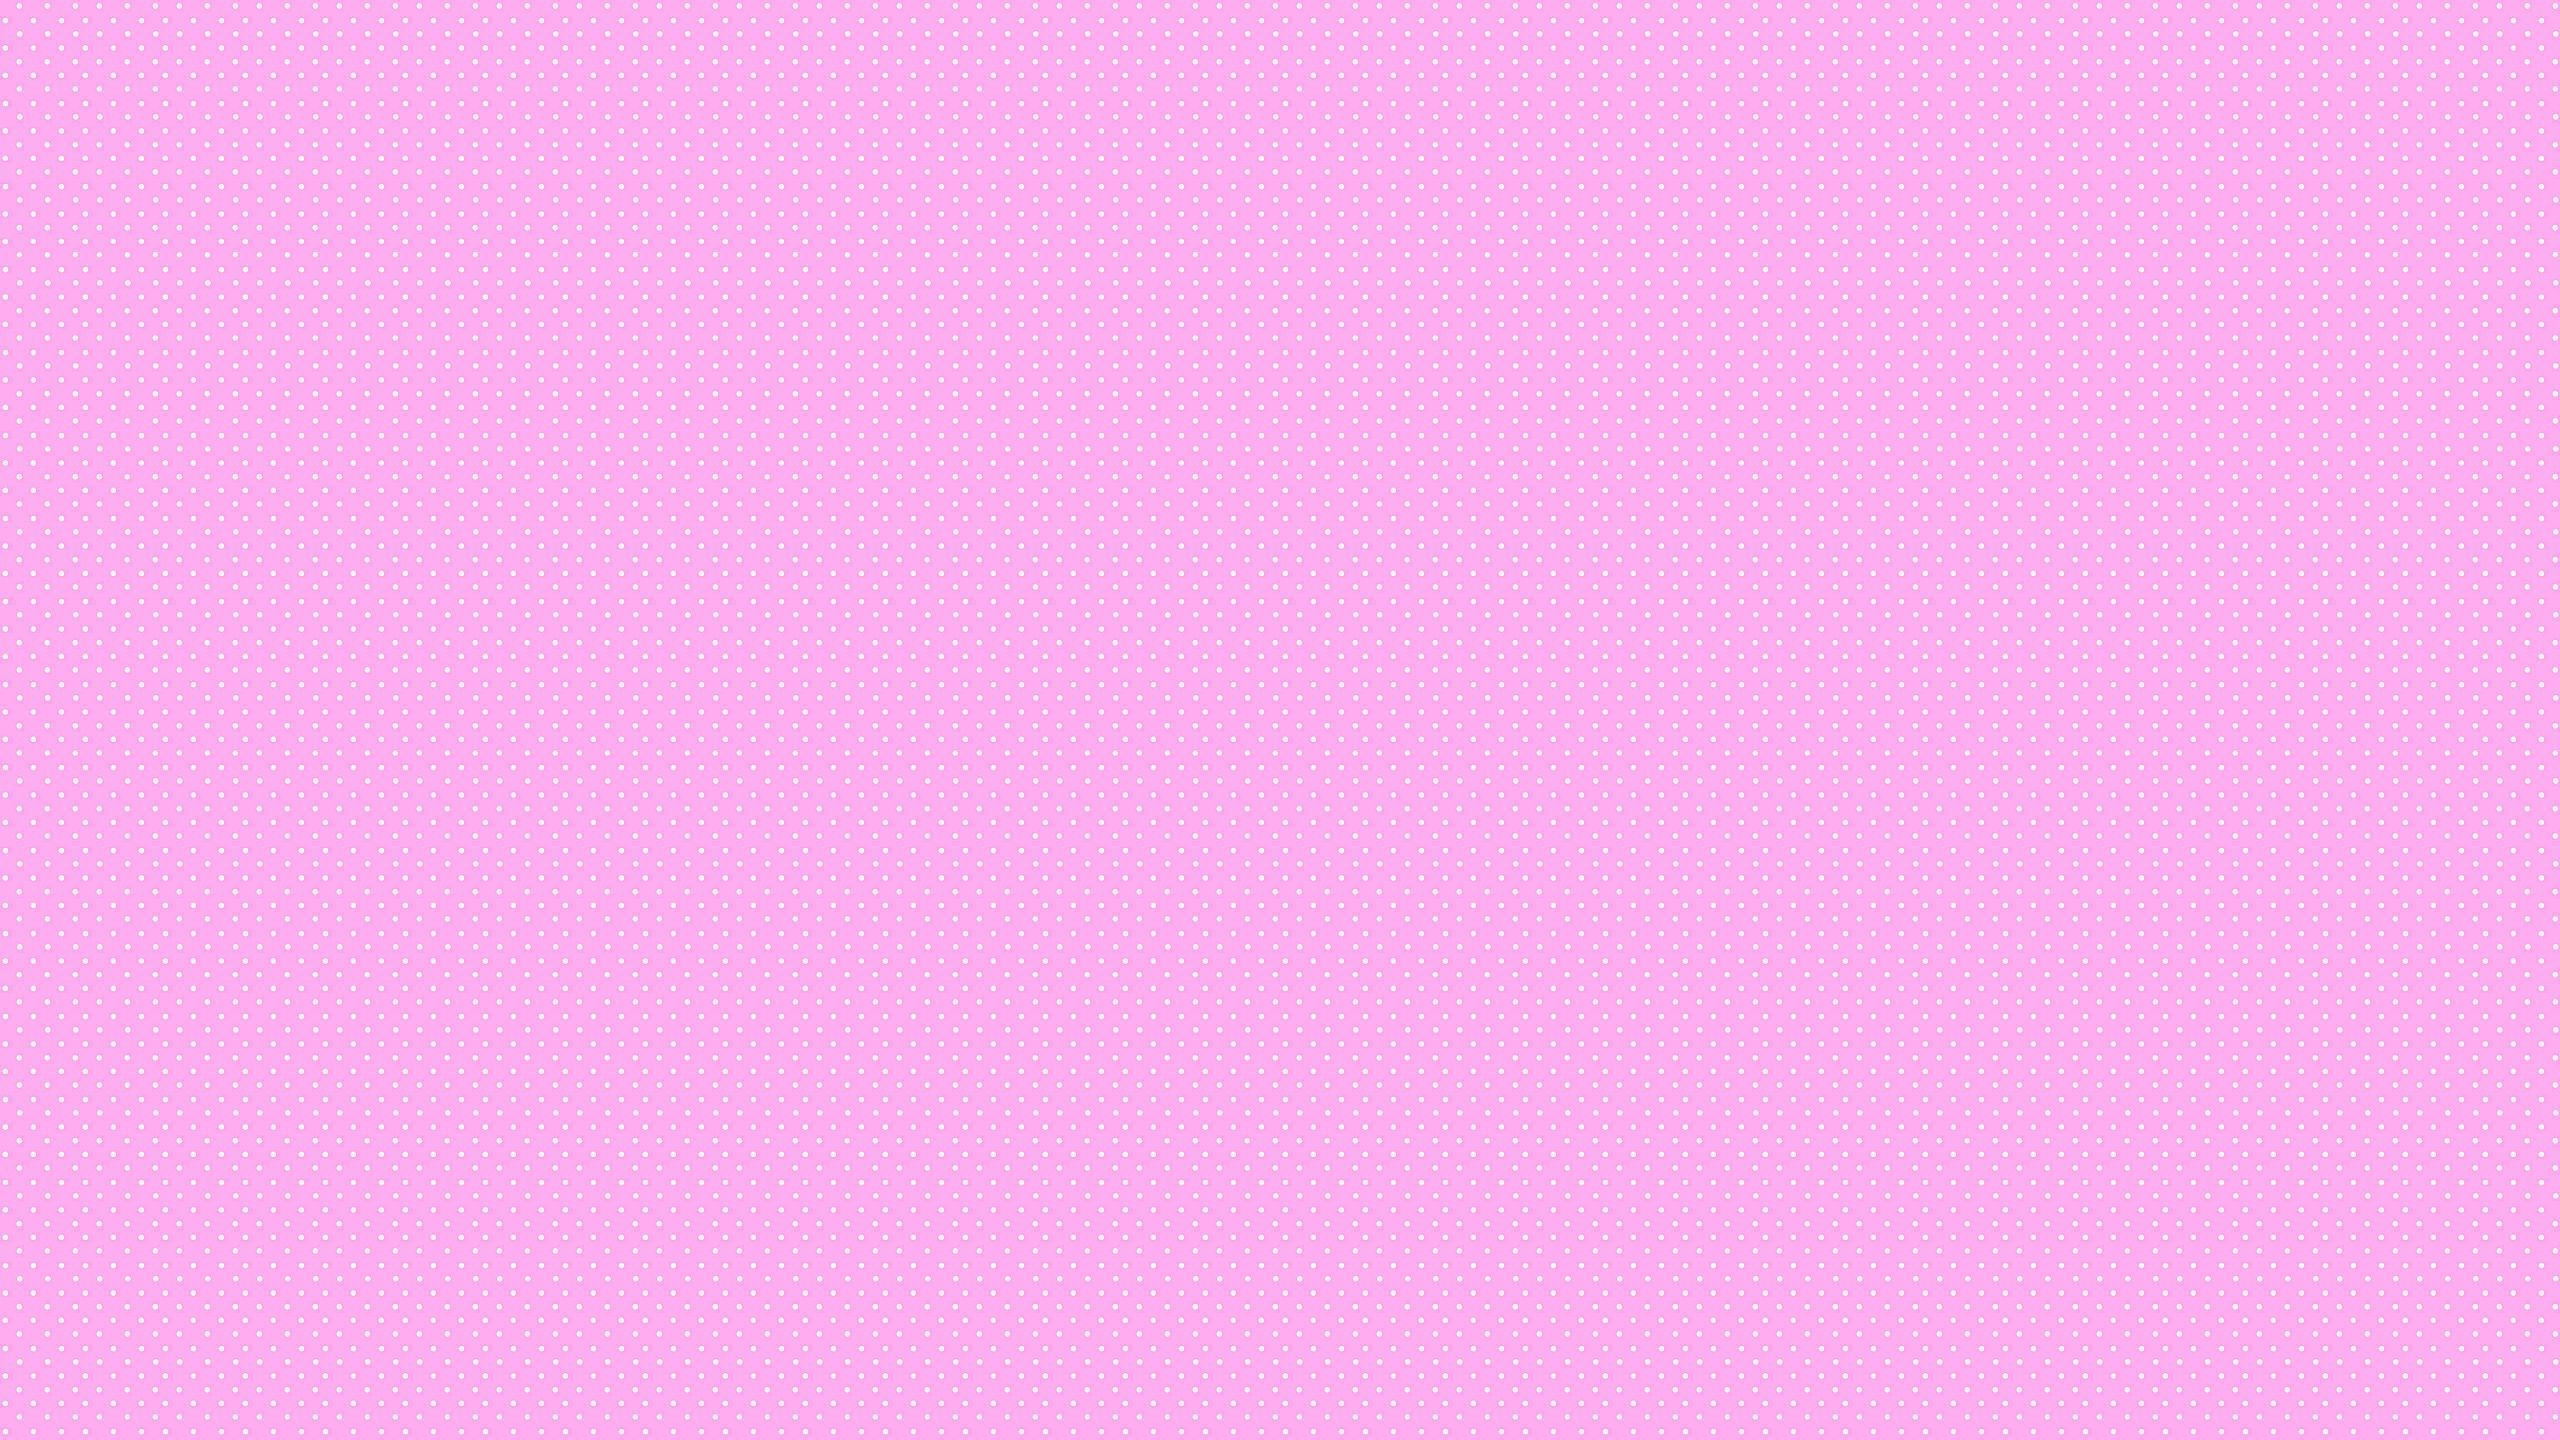 A pink background with a pattern of white dots - Hot pink